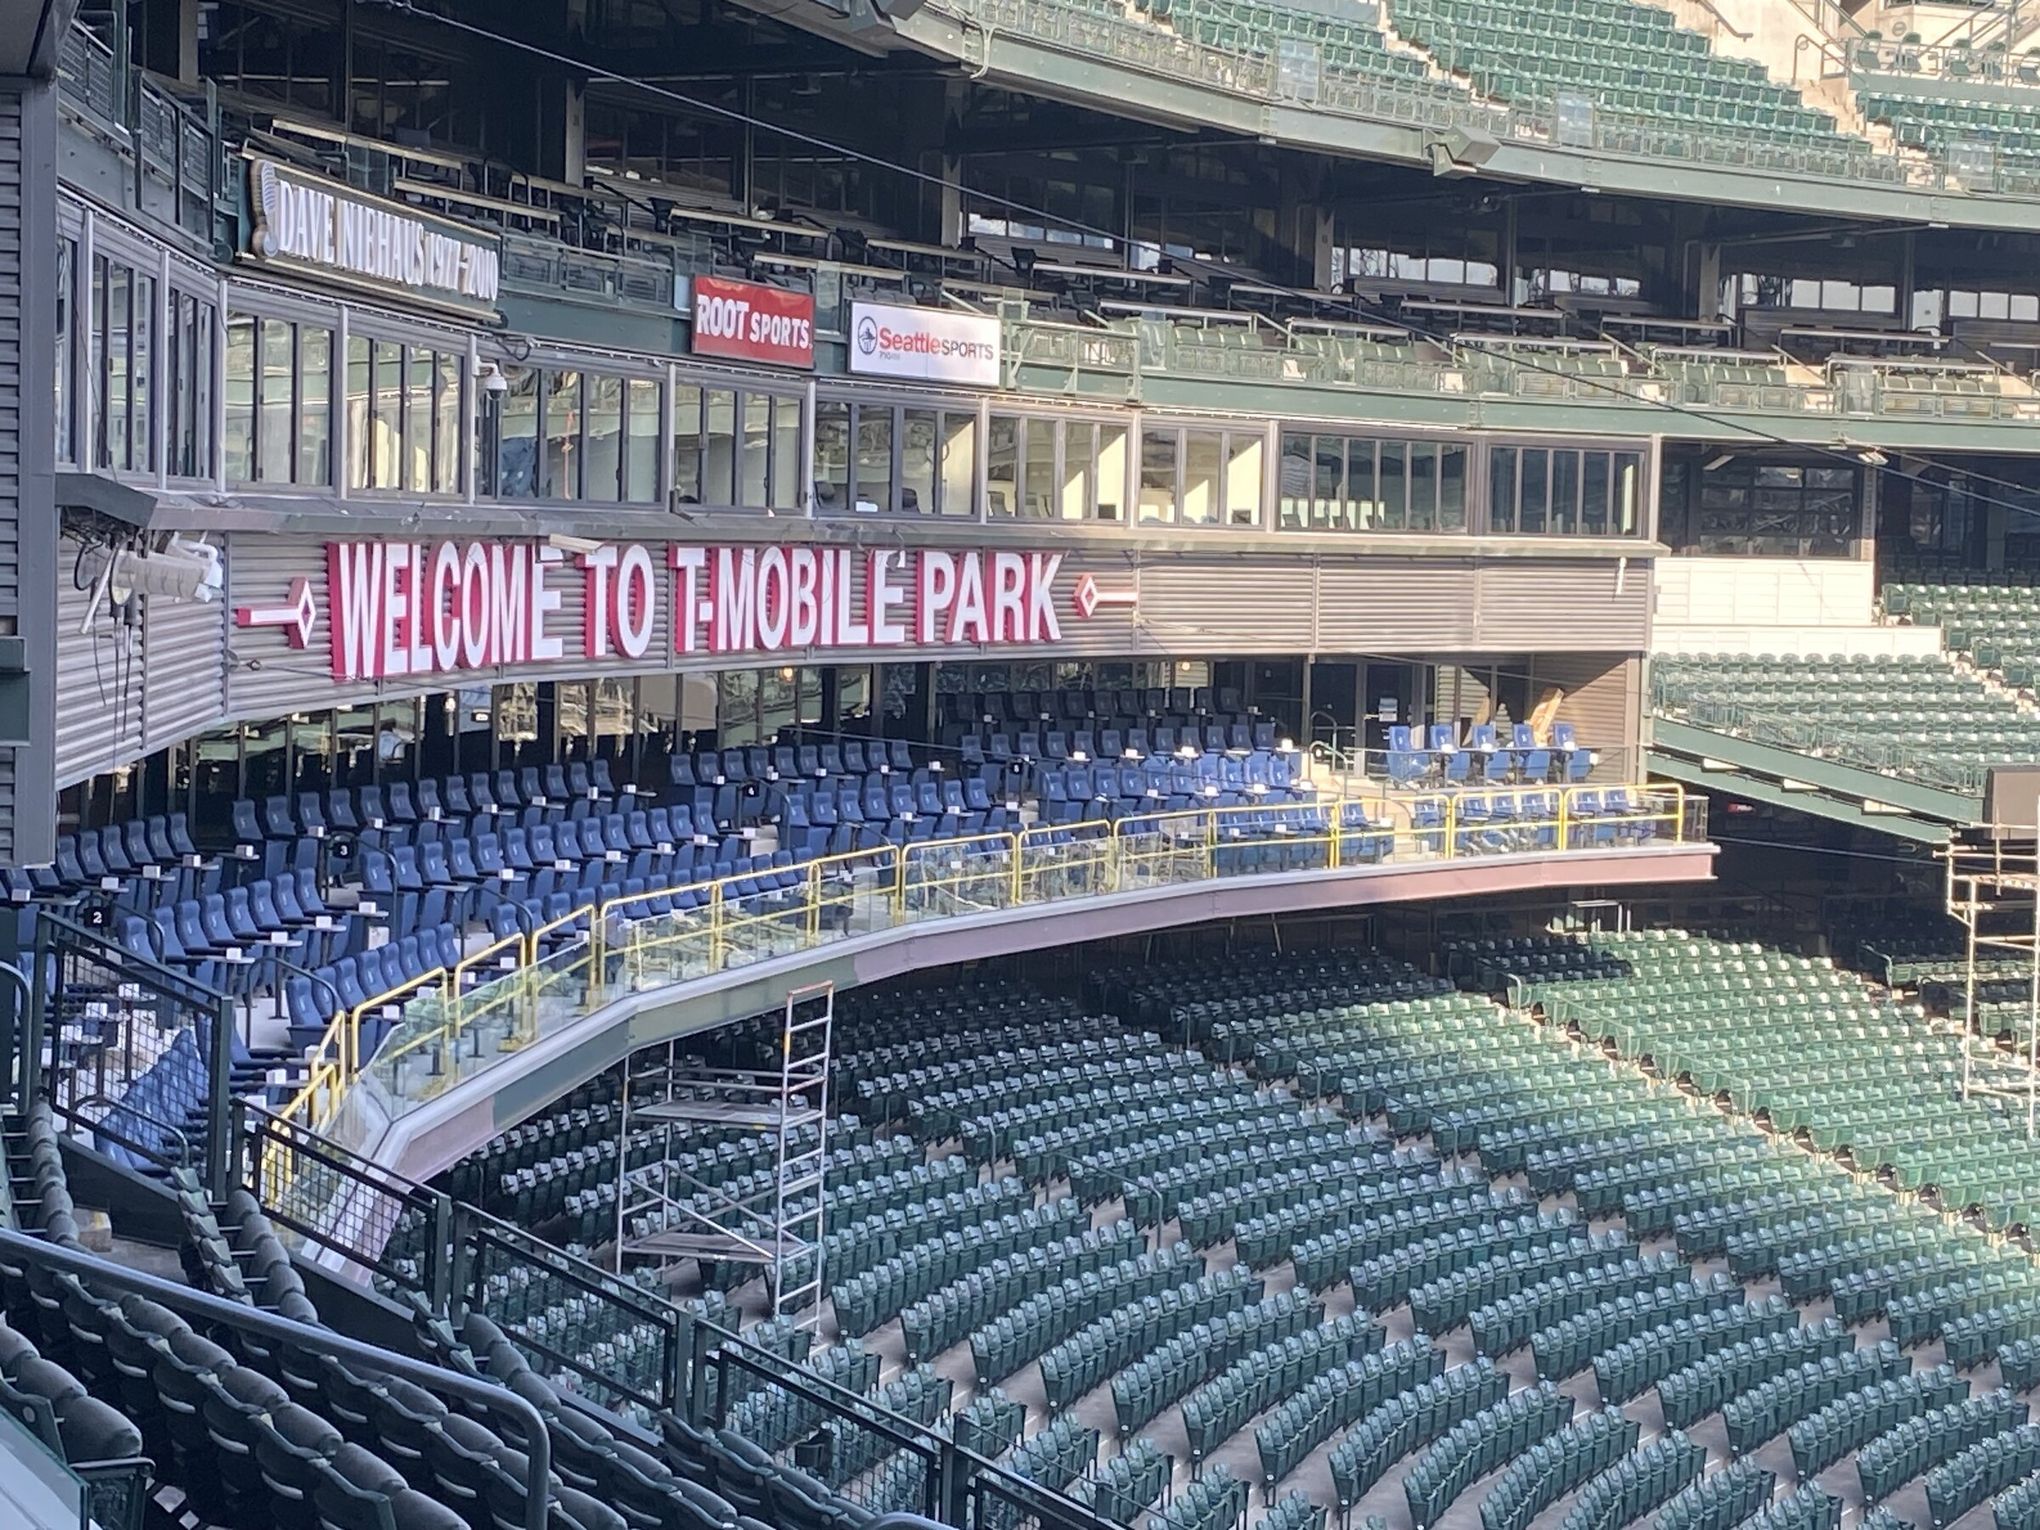 No Joy In Mudville As Mariners Press Box Moves To Smaller Digs The Seattle Times